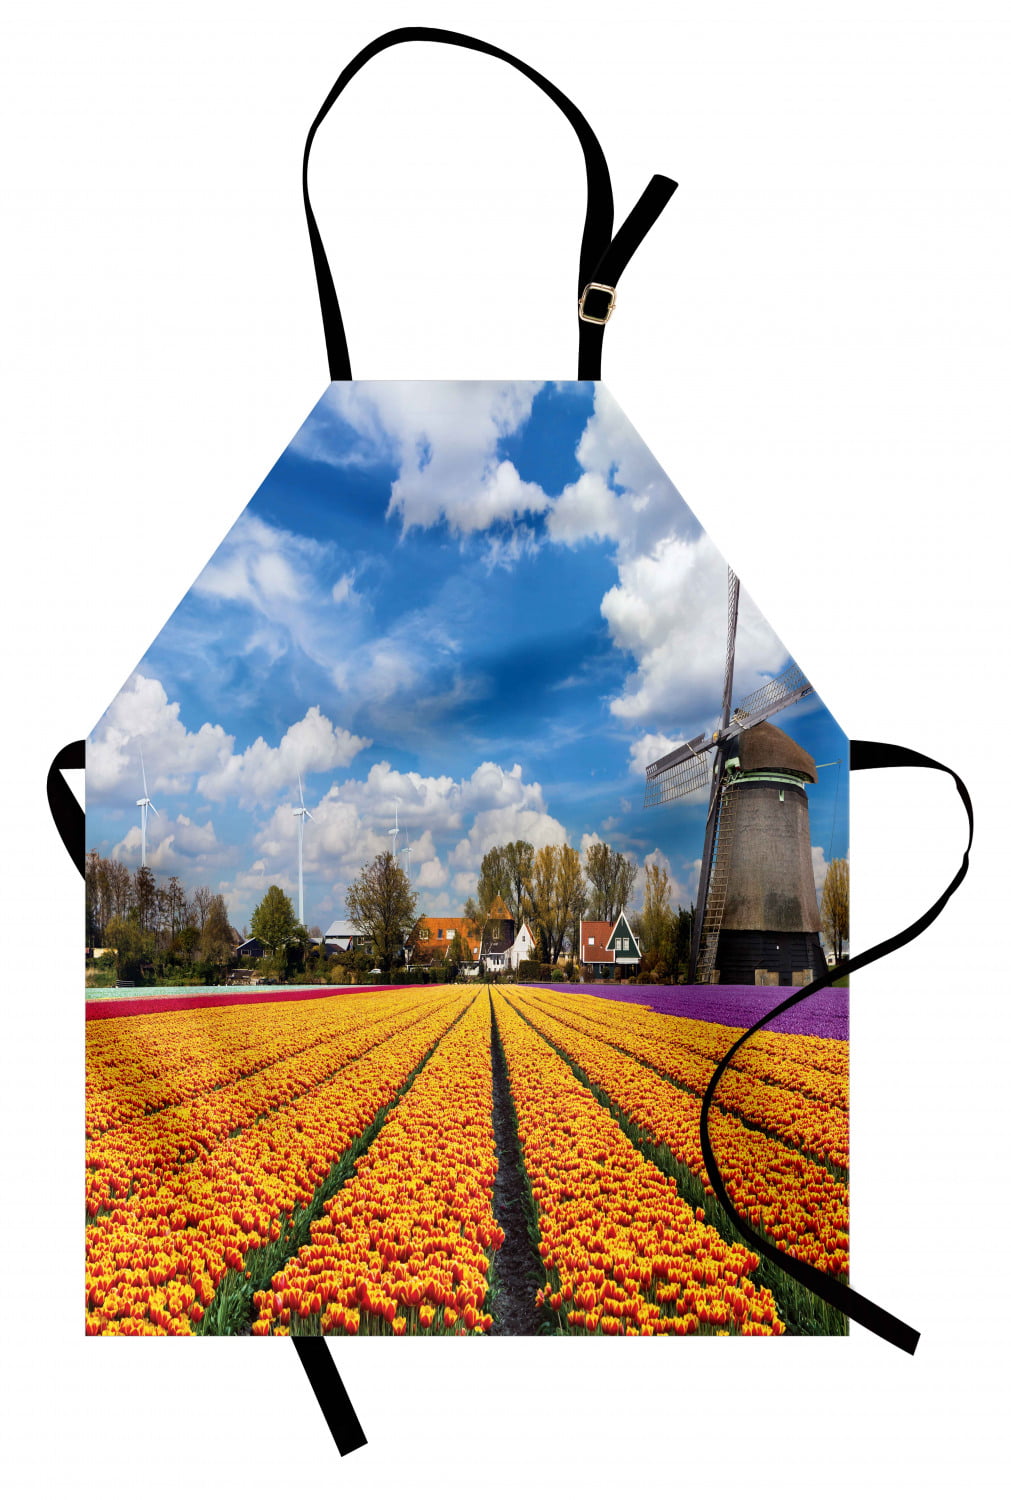 Adult Size Unisex Kitchen Bib with Adjustable Neck for Cooking Gardening Tulip Blooms with Classic Dutch Windmill Netherlands Countryside Spring Picture Ambesonne Landscape Apron Yellow Blue 